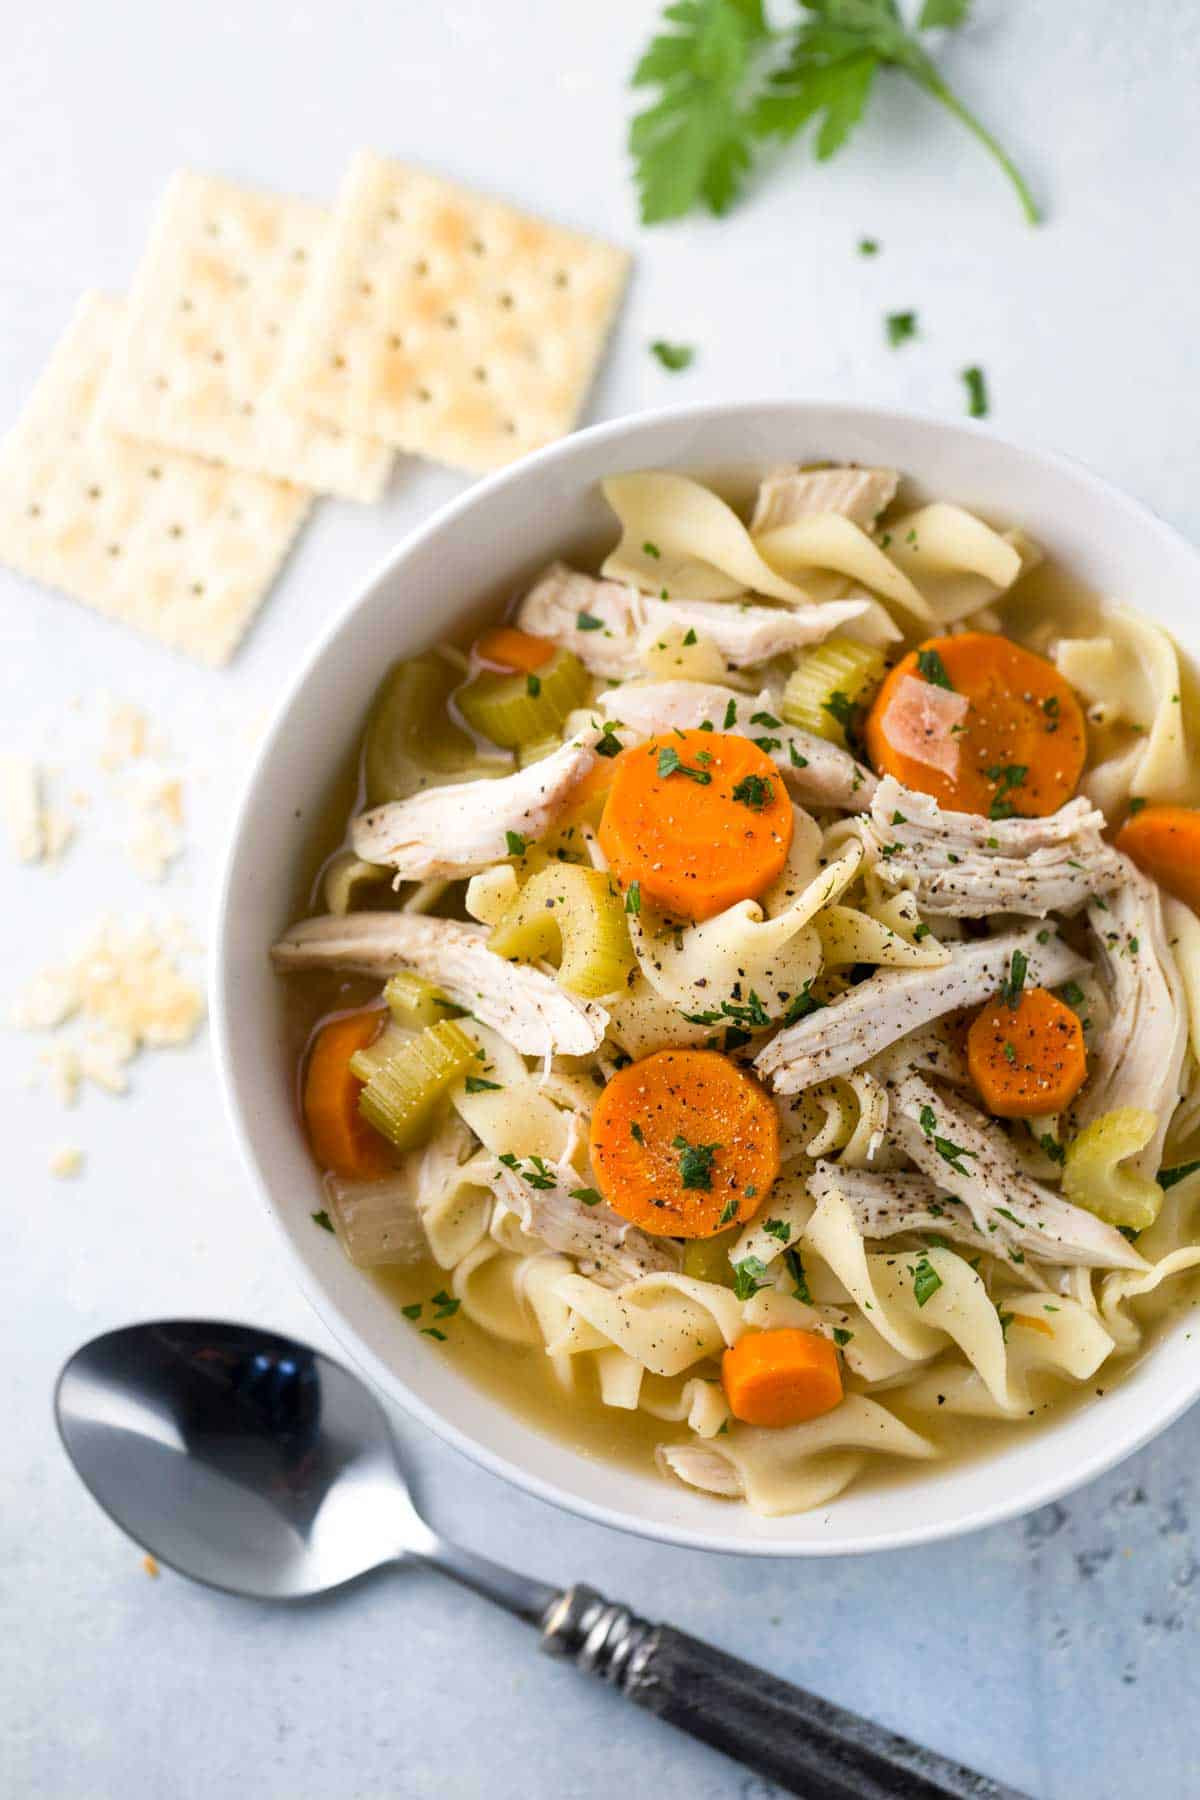 Chicken Noodle Soup With Vegetables
 Easy Slow Cooker Chicken Noodle Soup Recipe